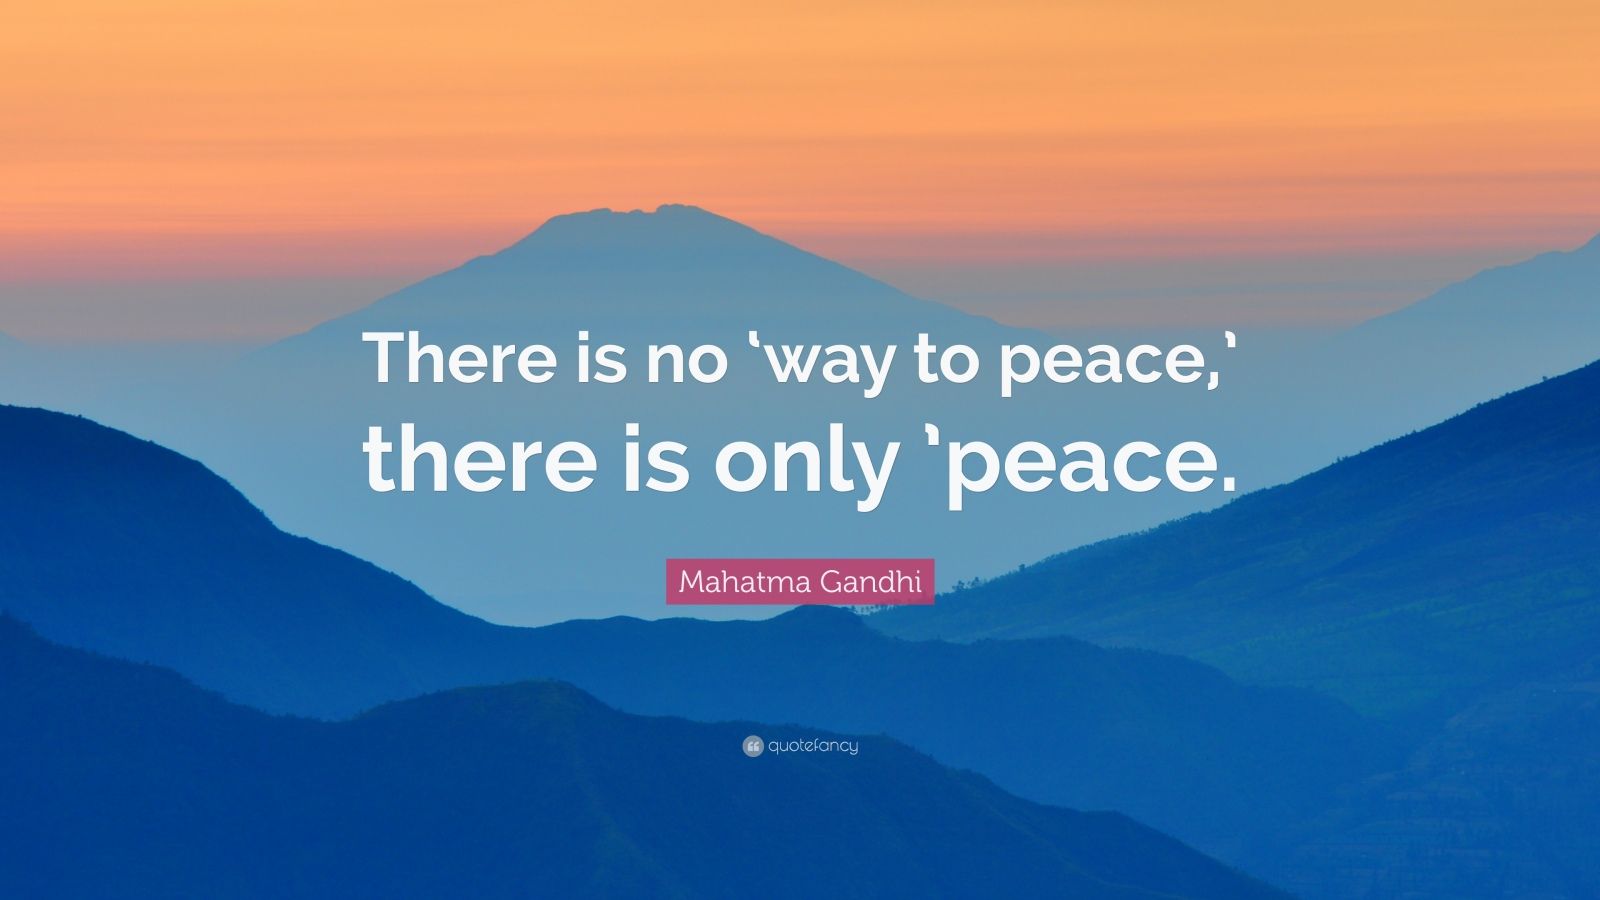 Mahatma Gandhi Quote: “There is no ‘way to peace,’ there is only ’peace ...